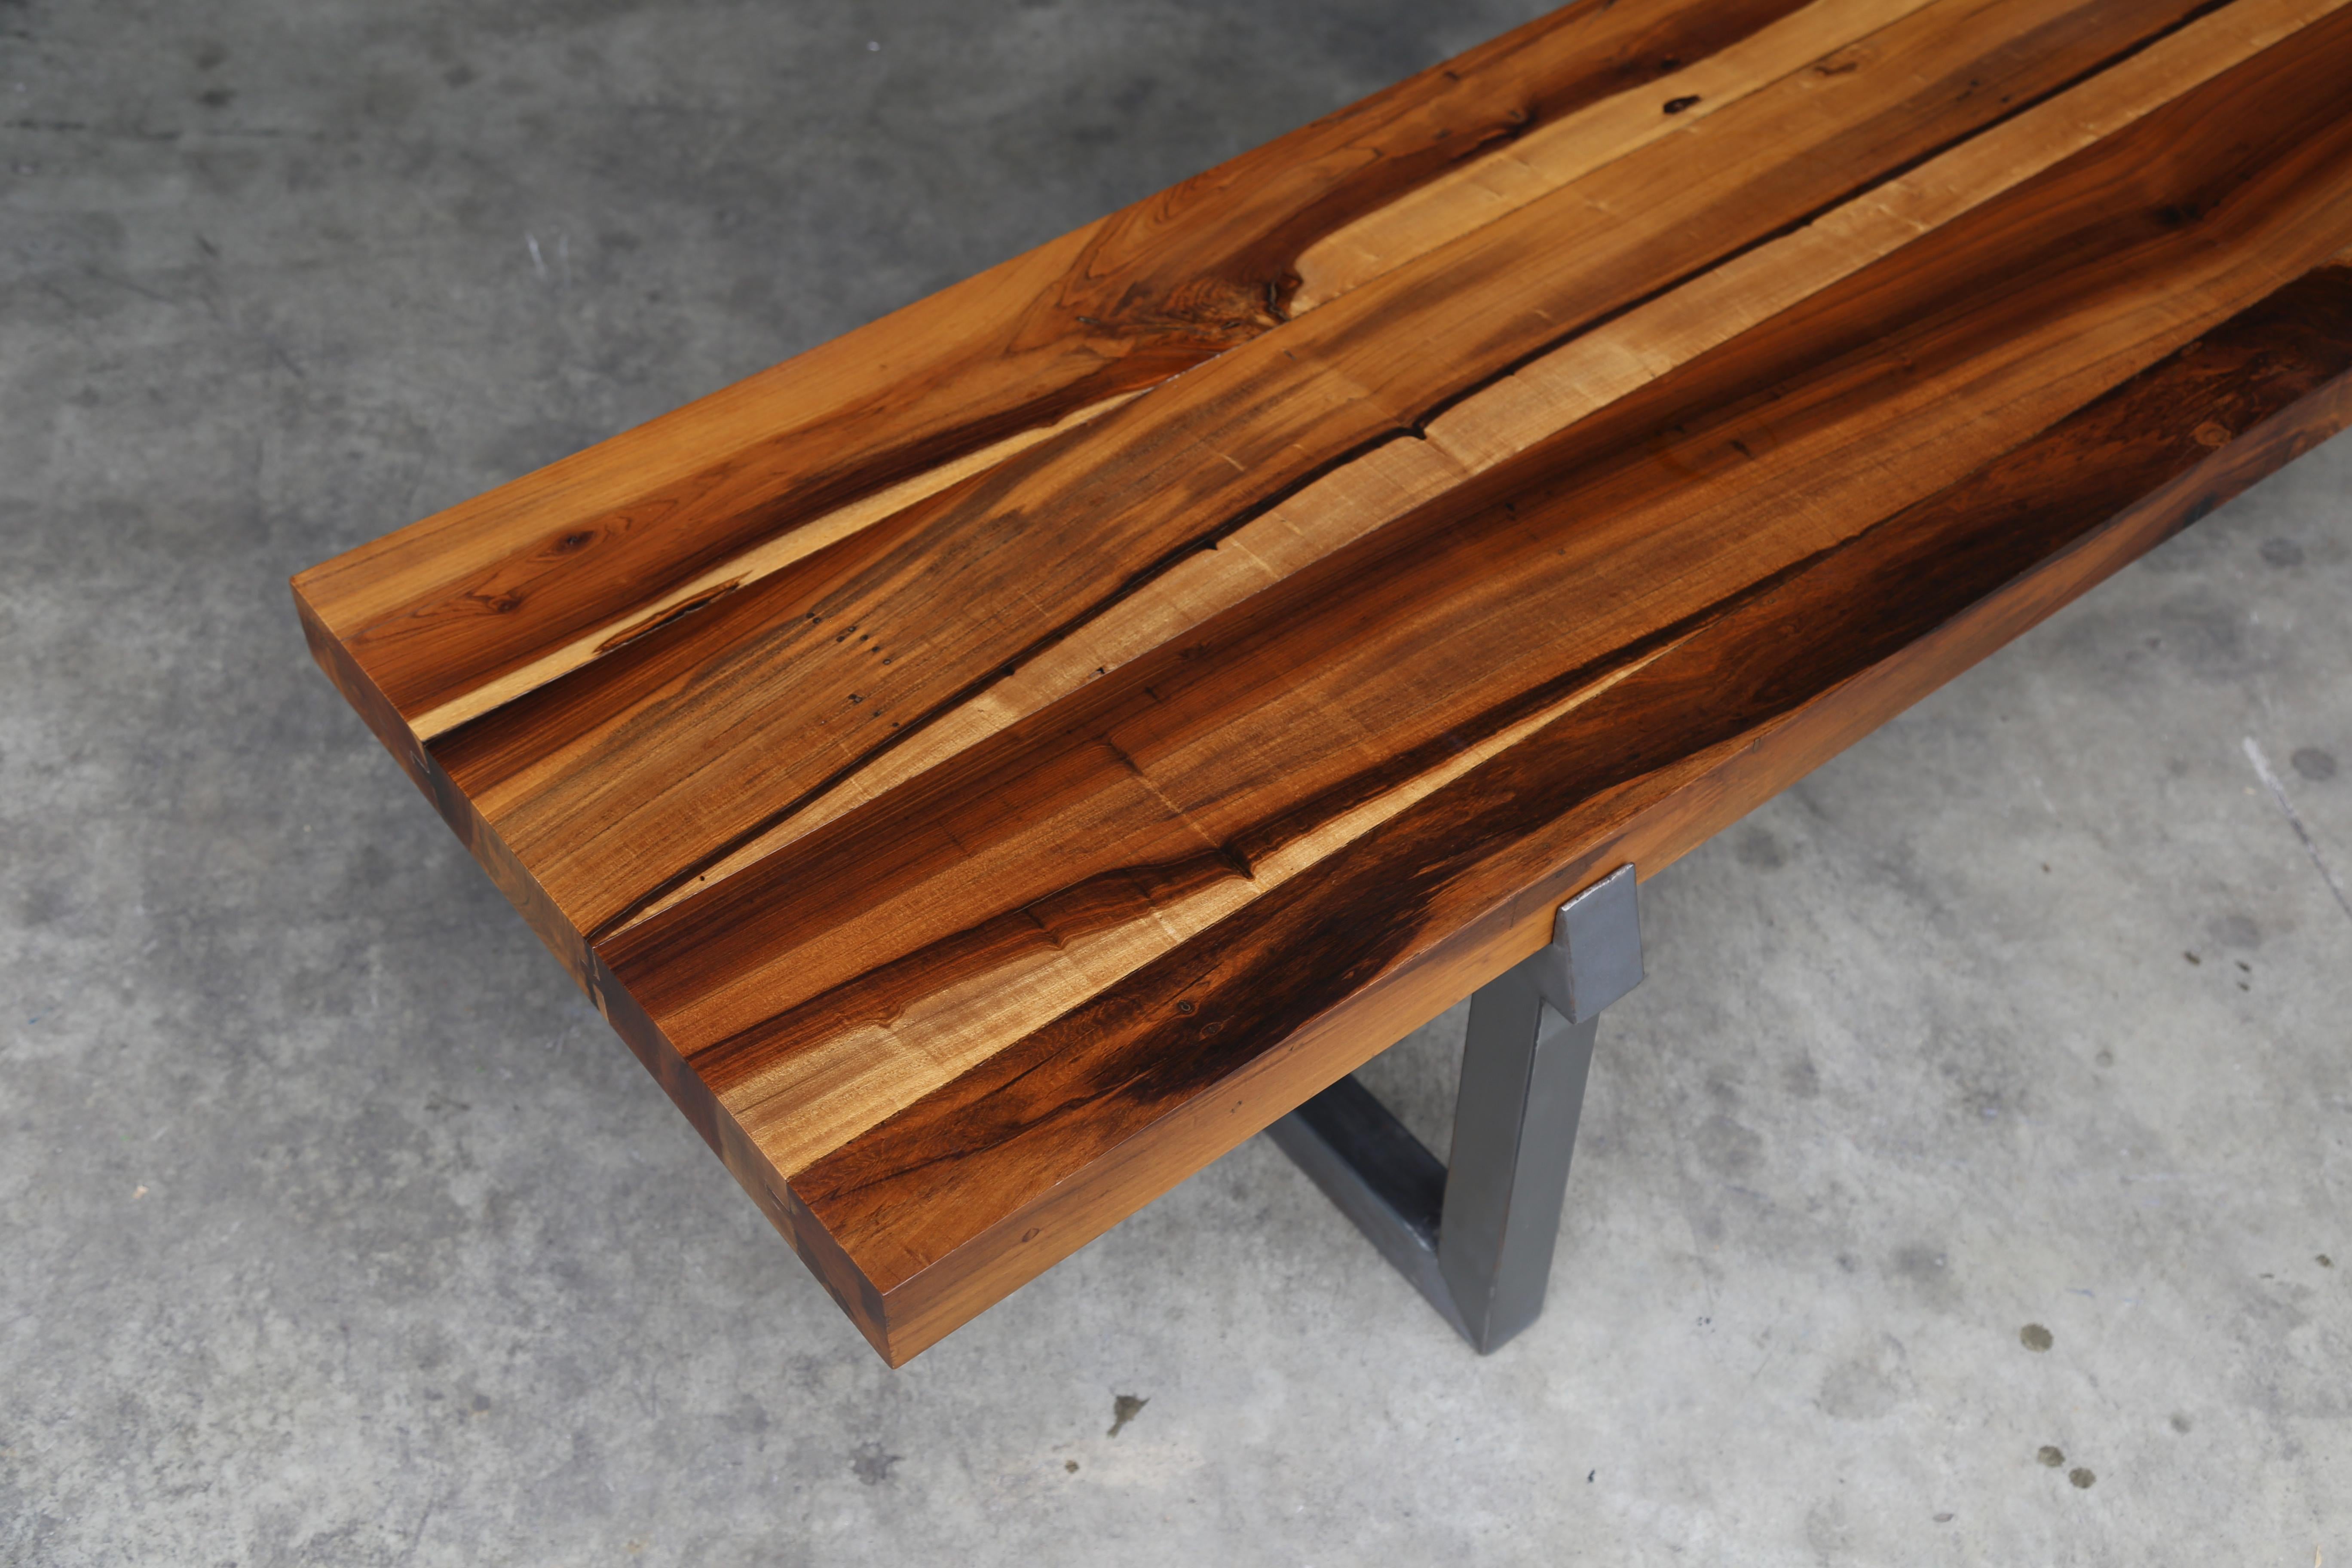 Argentine Exotic Wood and Steel Custom Bench from Costantini, Donato 'In Stock'